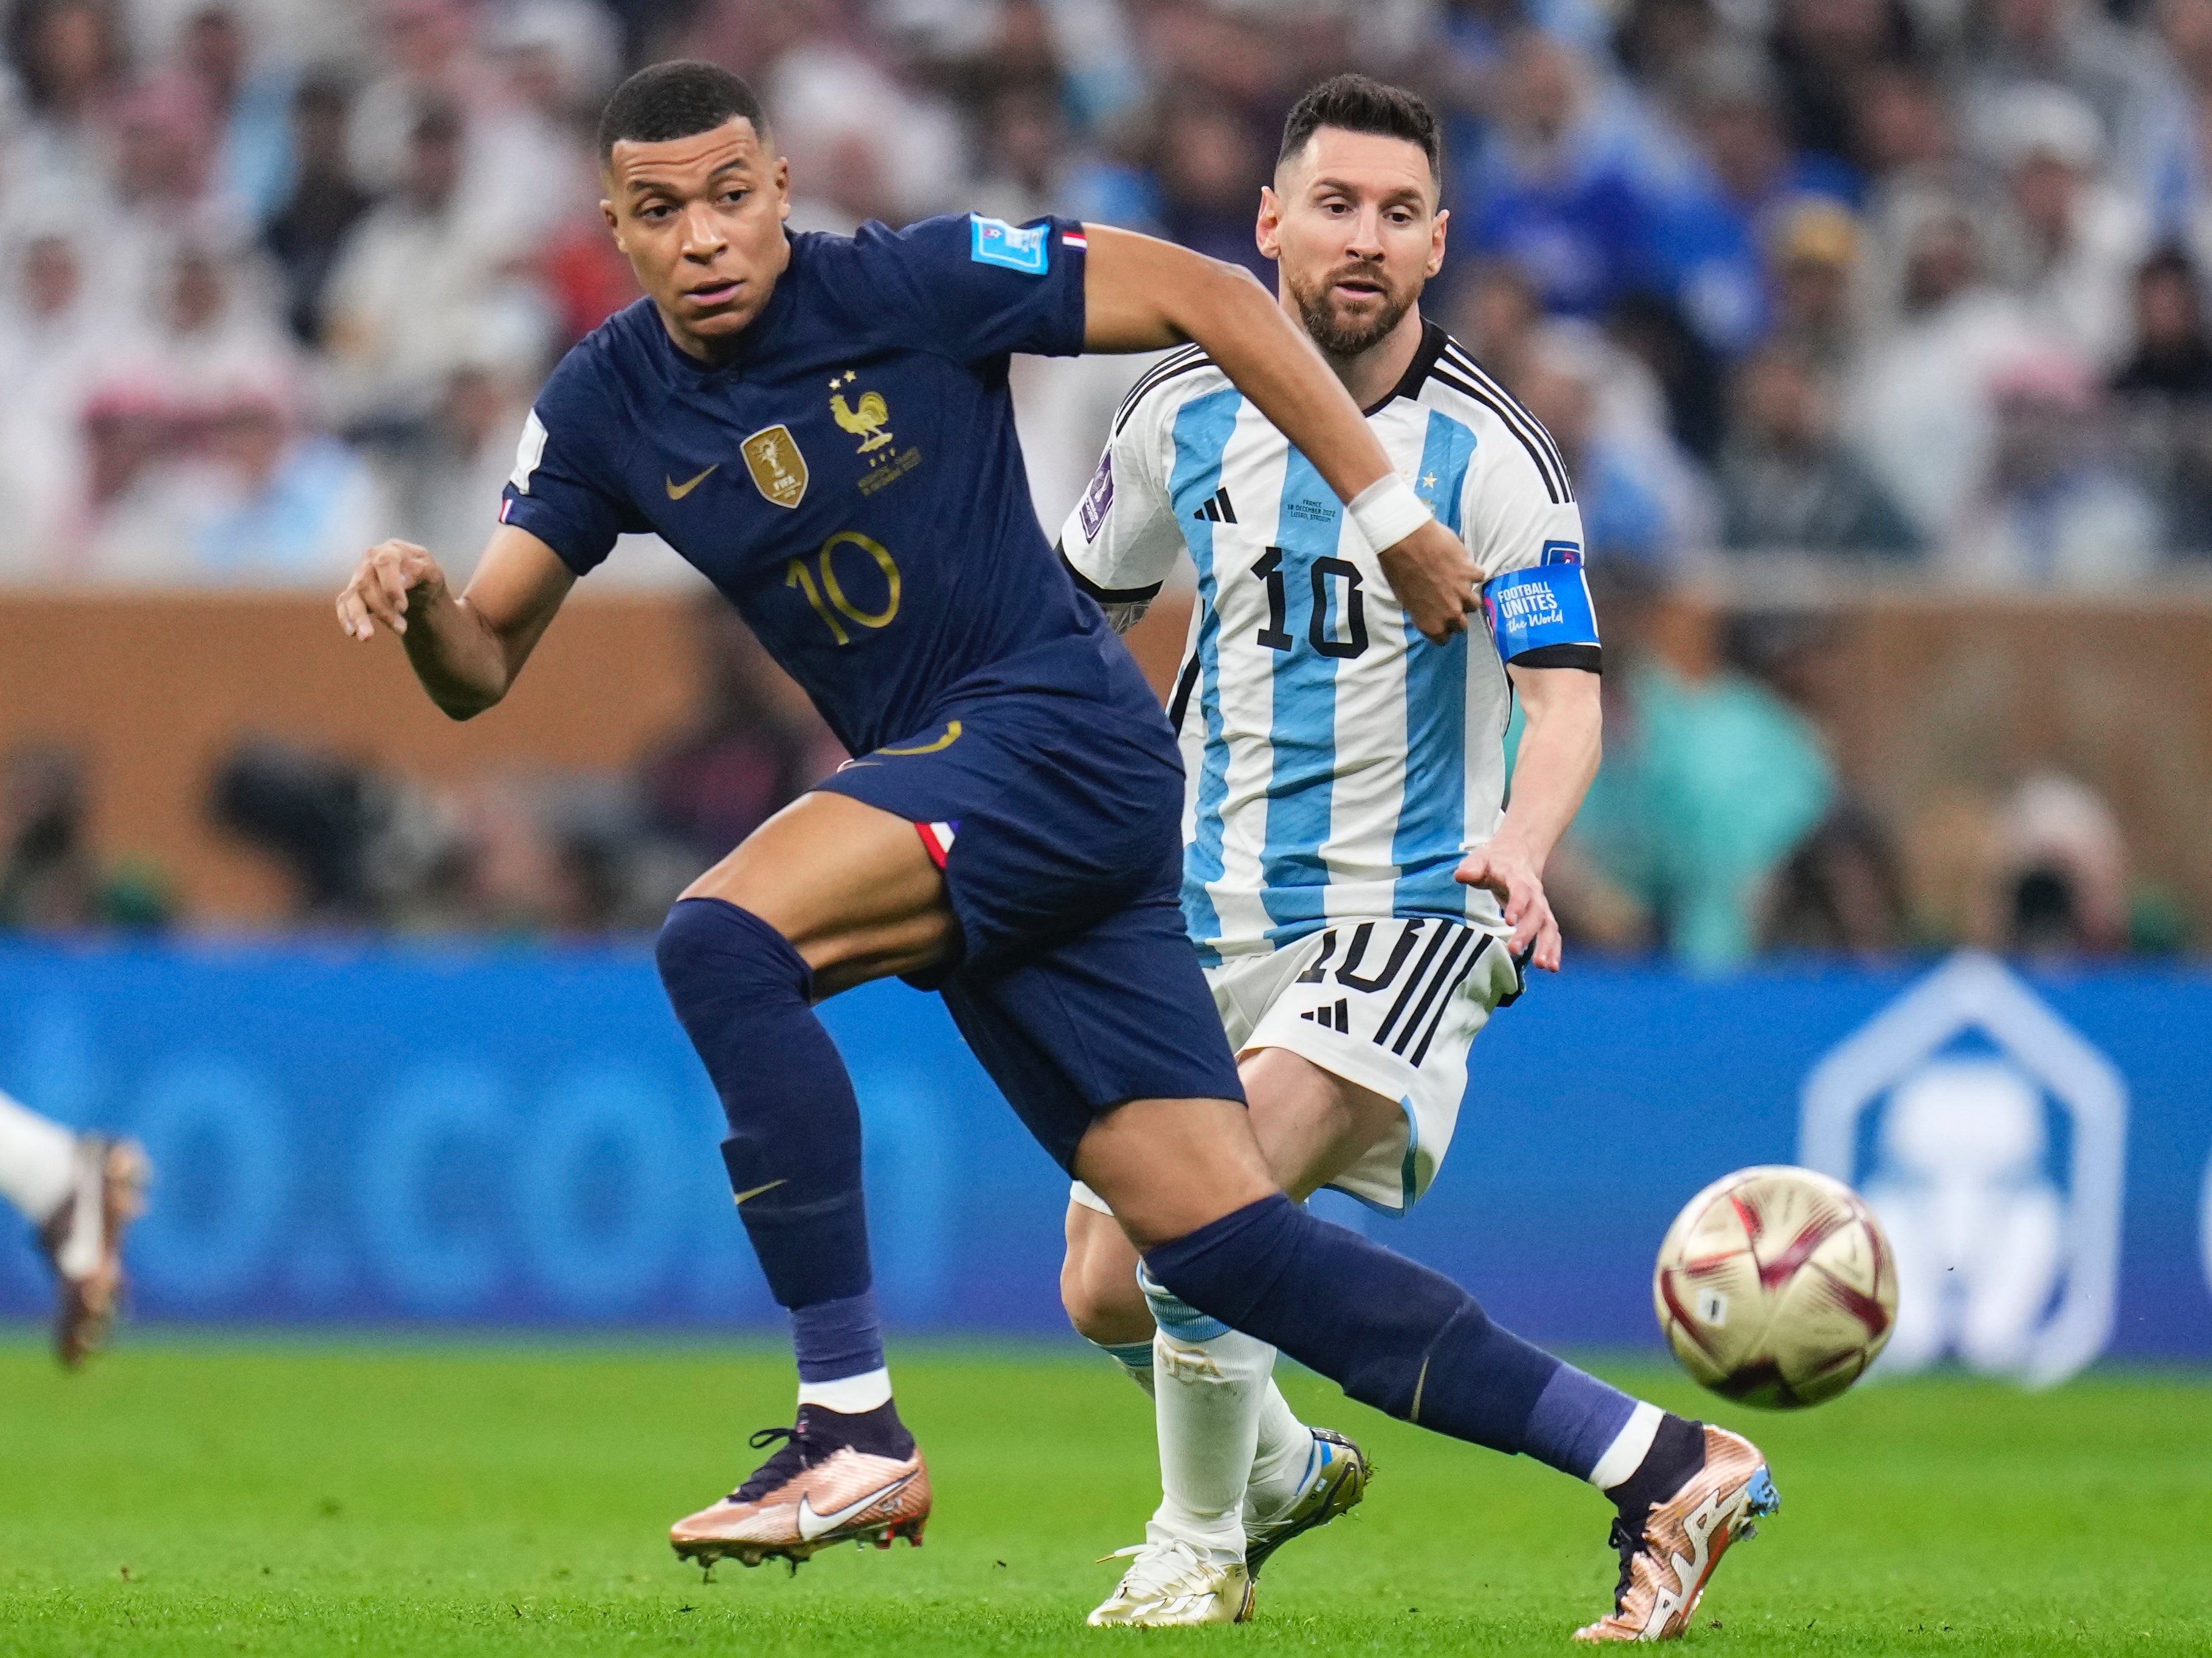 Kylian Mbappe and Lionel Messi go for the ball